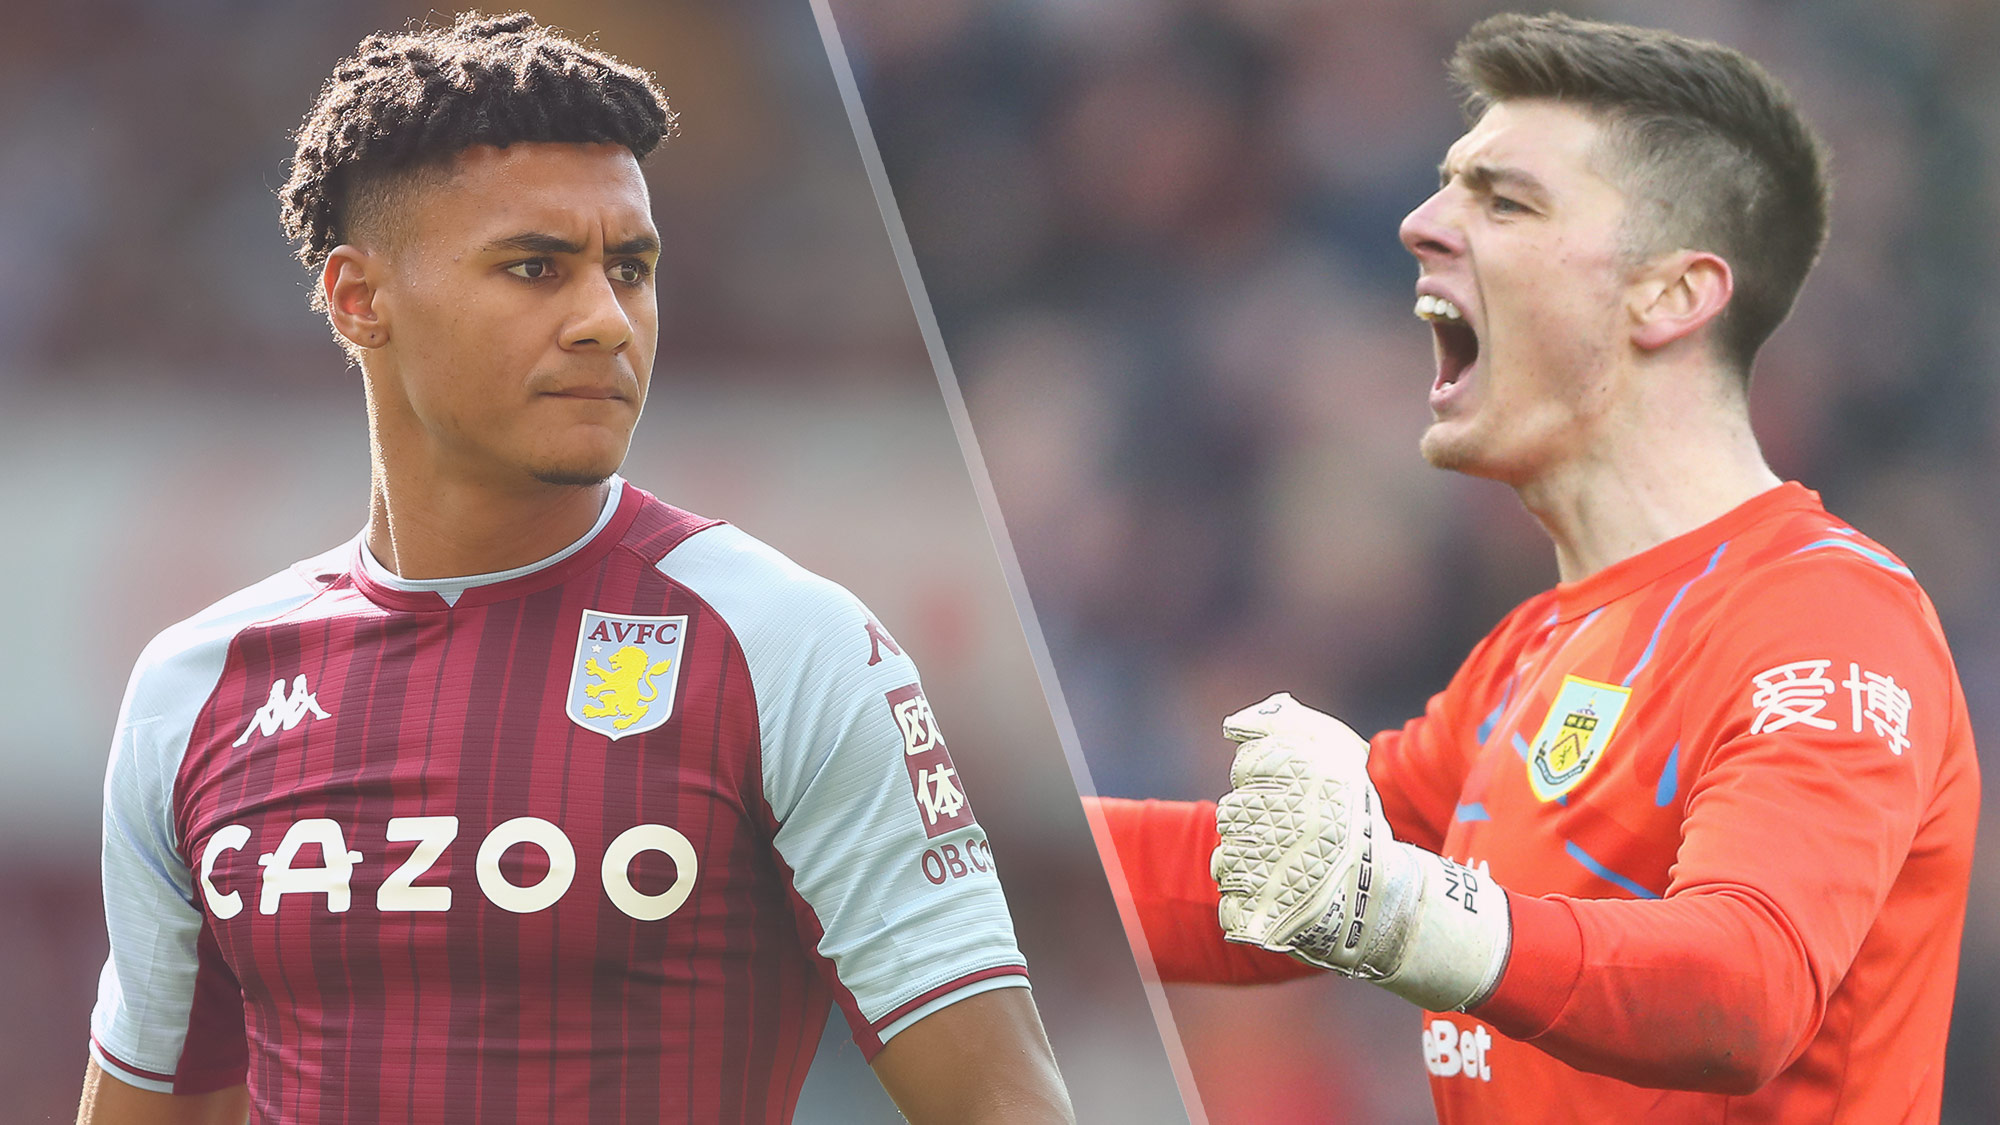 Aston Villa vs Burnley live stream and how to watch Premier League game online